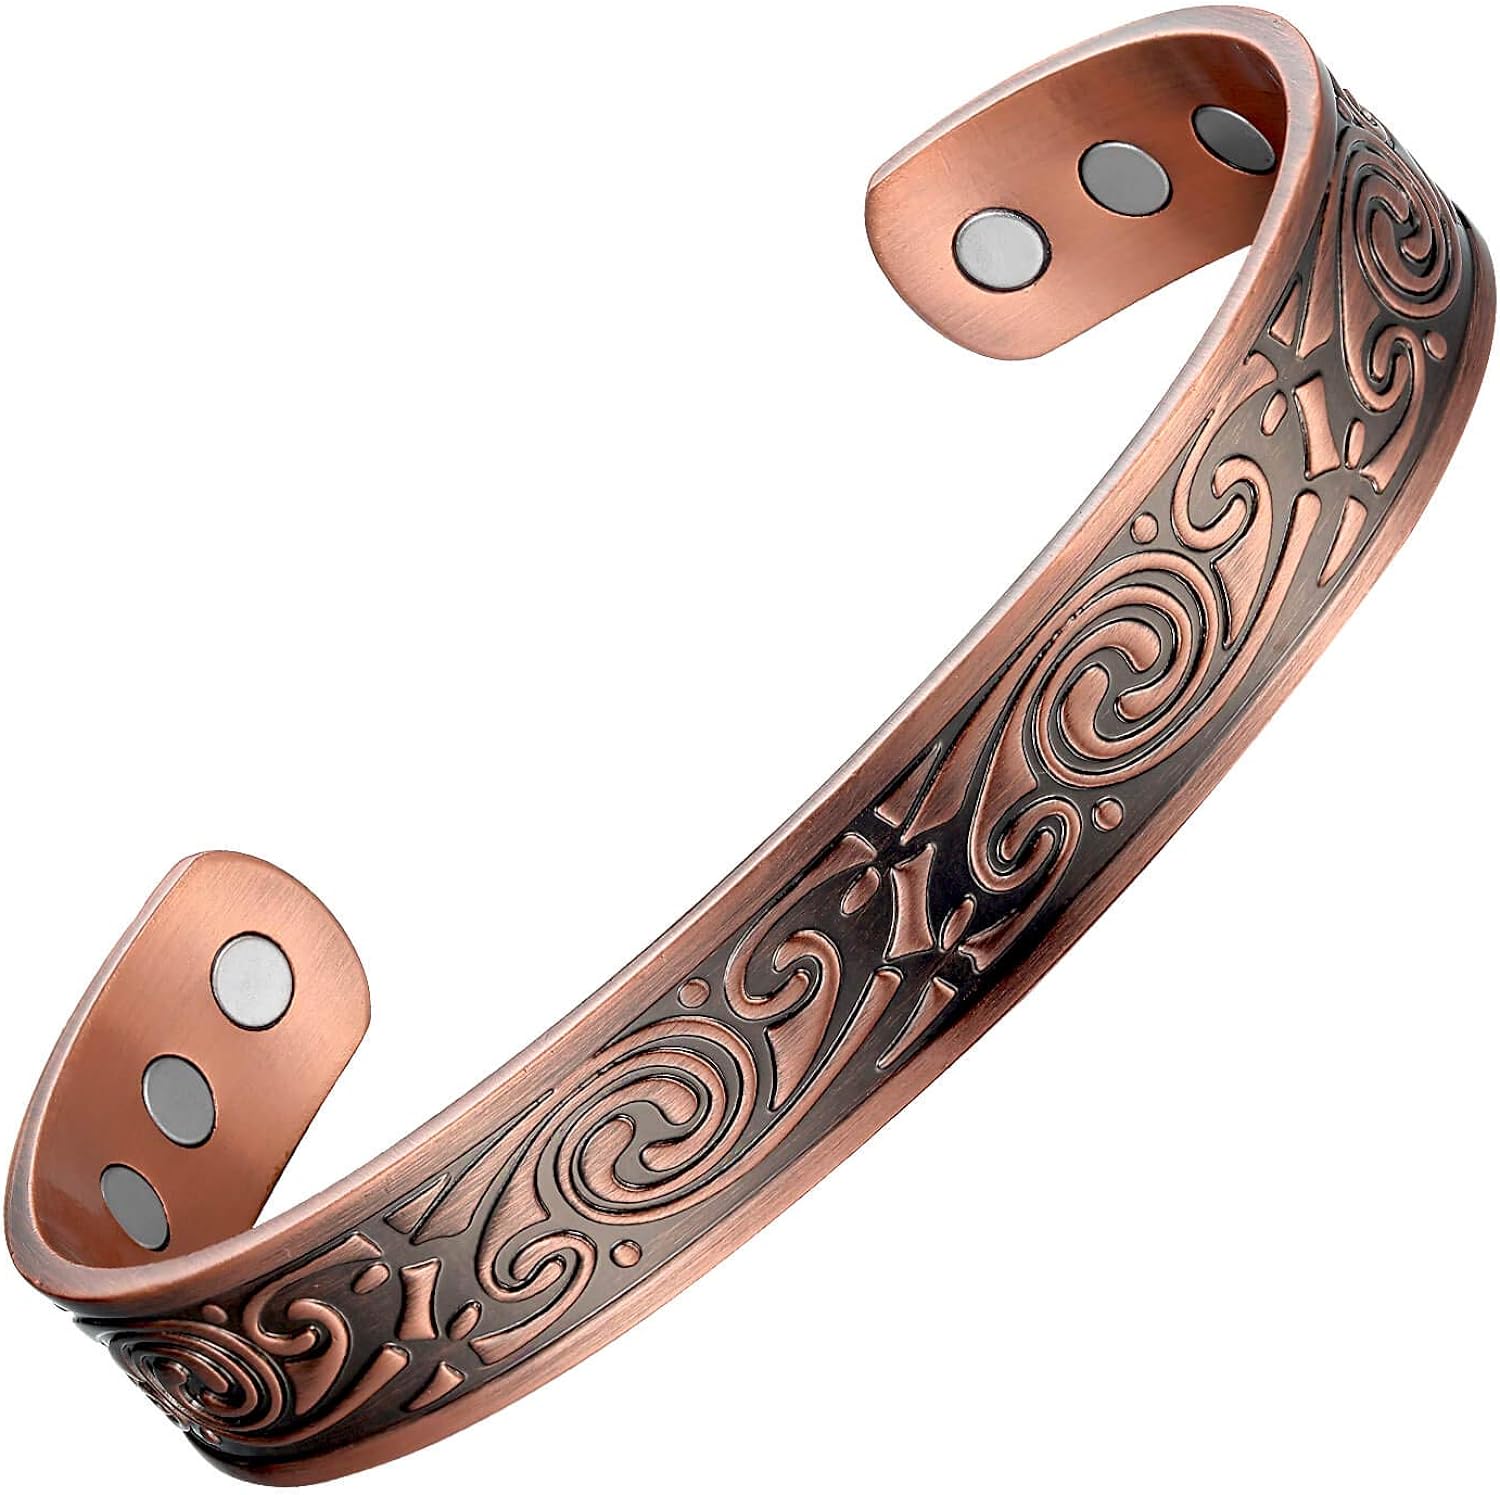 Mens Copper Bracelets Viking Pattern 99.9% Pure Copper Magnetic Bracelet 6.7inches with 6 Powerful Magnets for Effective Joint Pain Relief, Arthritis, RSI, Carpal Tunnel